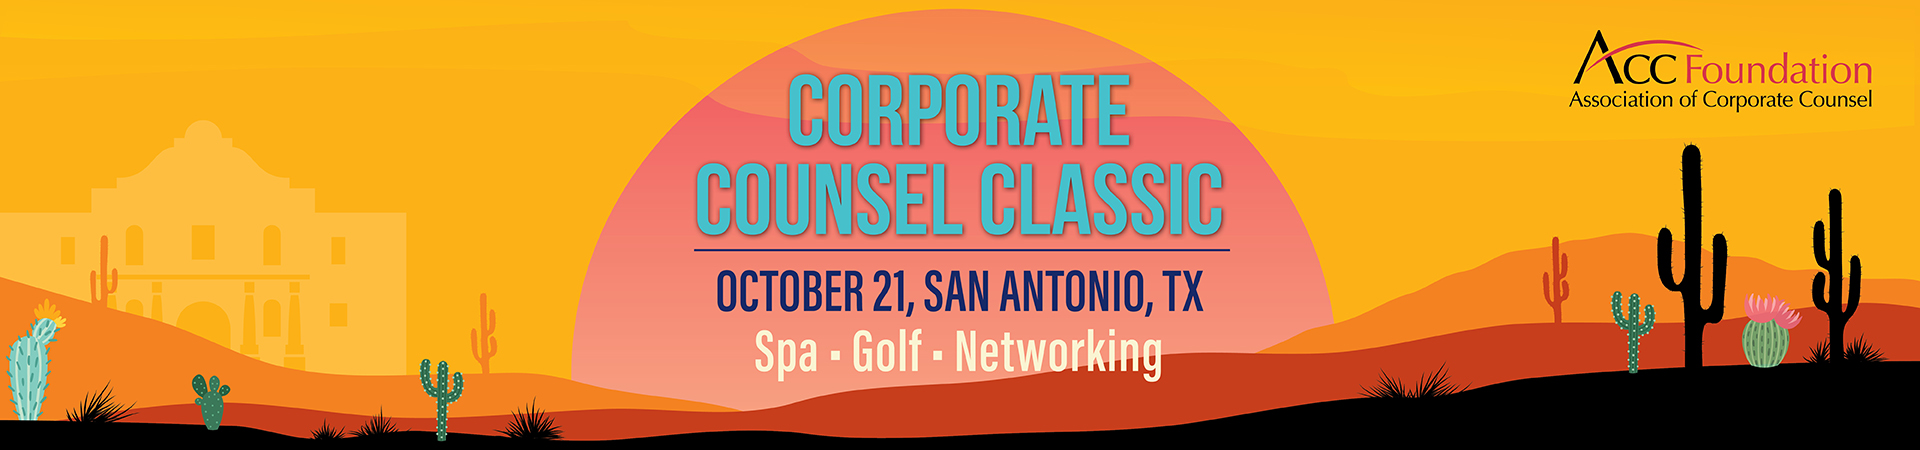 Corporate Counsel Classic October 21, San Antonio, TX Spa, Golf, Networking ACC Foundation